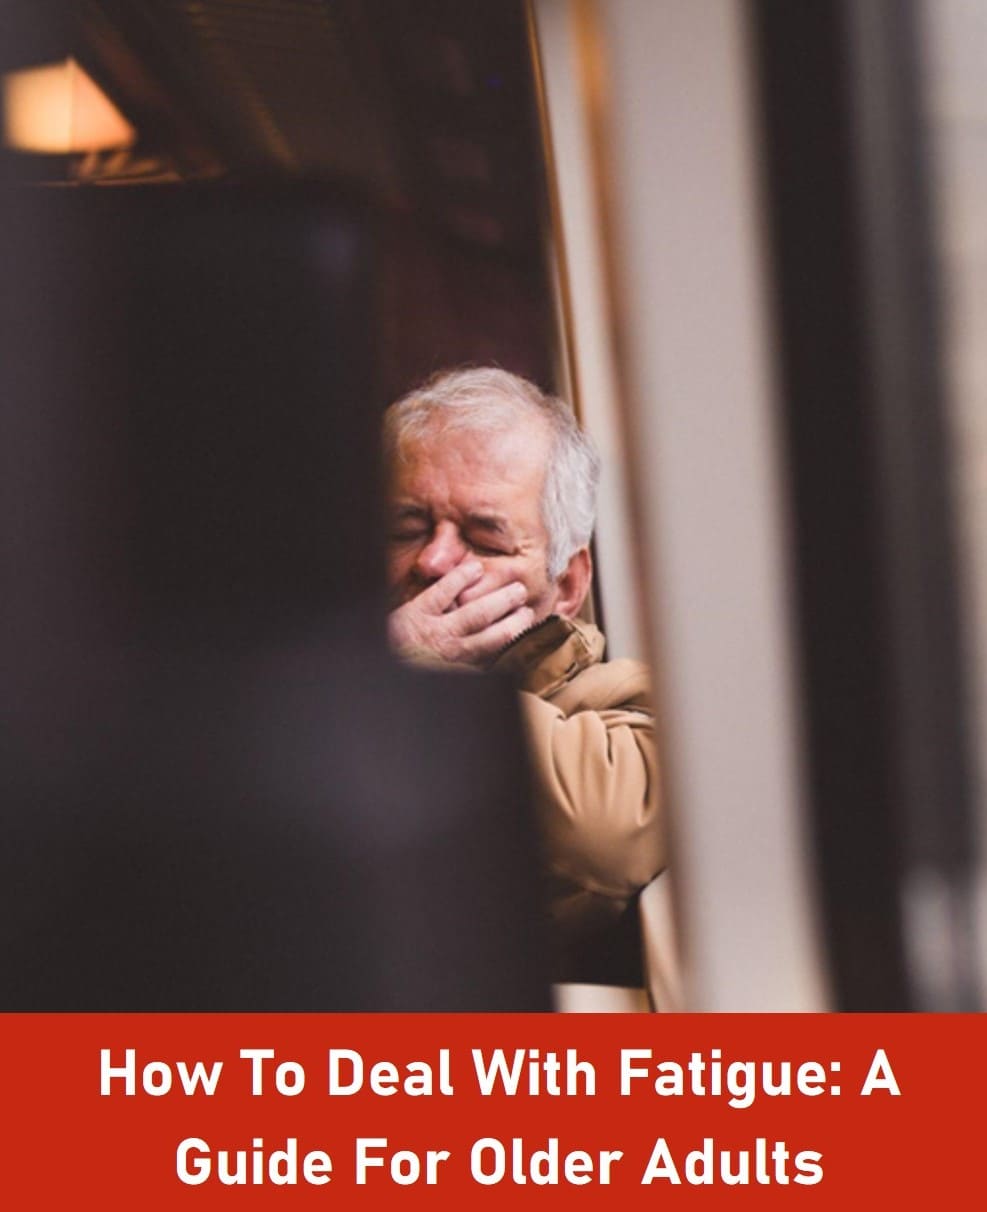 How To Deal With Fatigue: A Guide For Older Adults